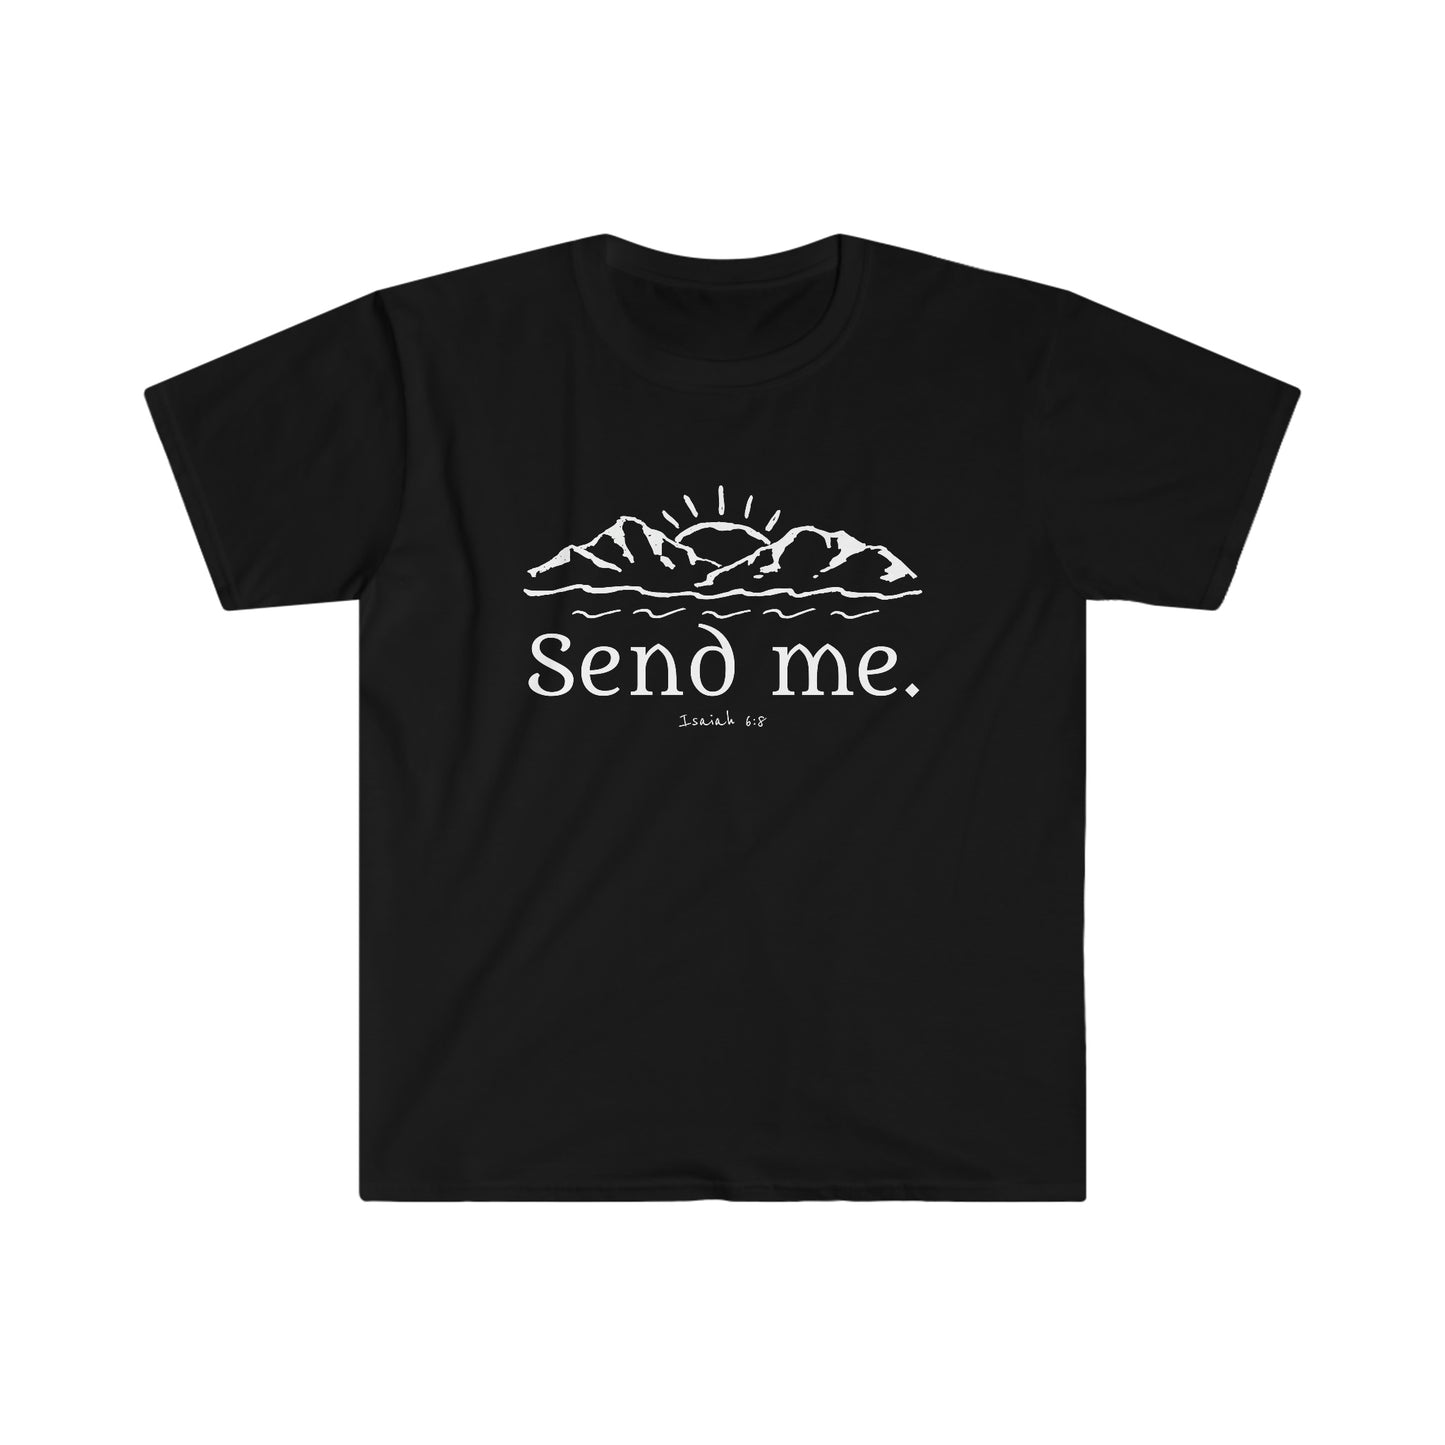 Unisex Softstyle T-Shirt, Missionary, Mission Prep, Send Me